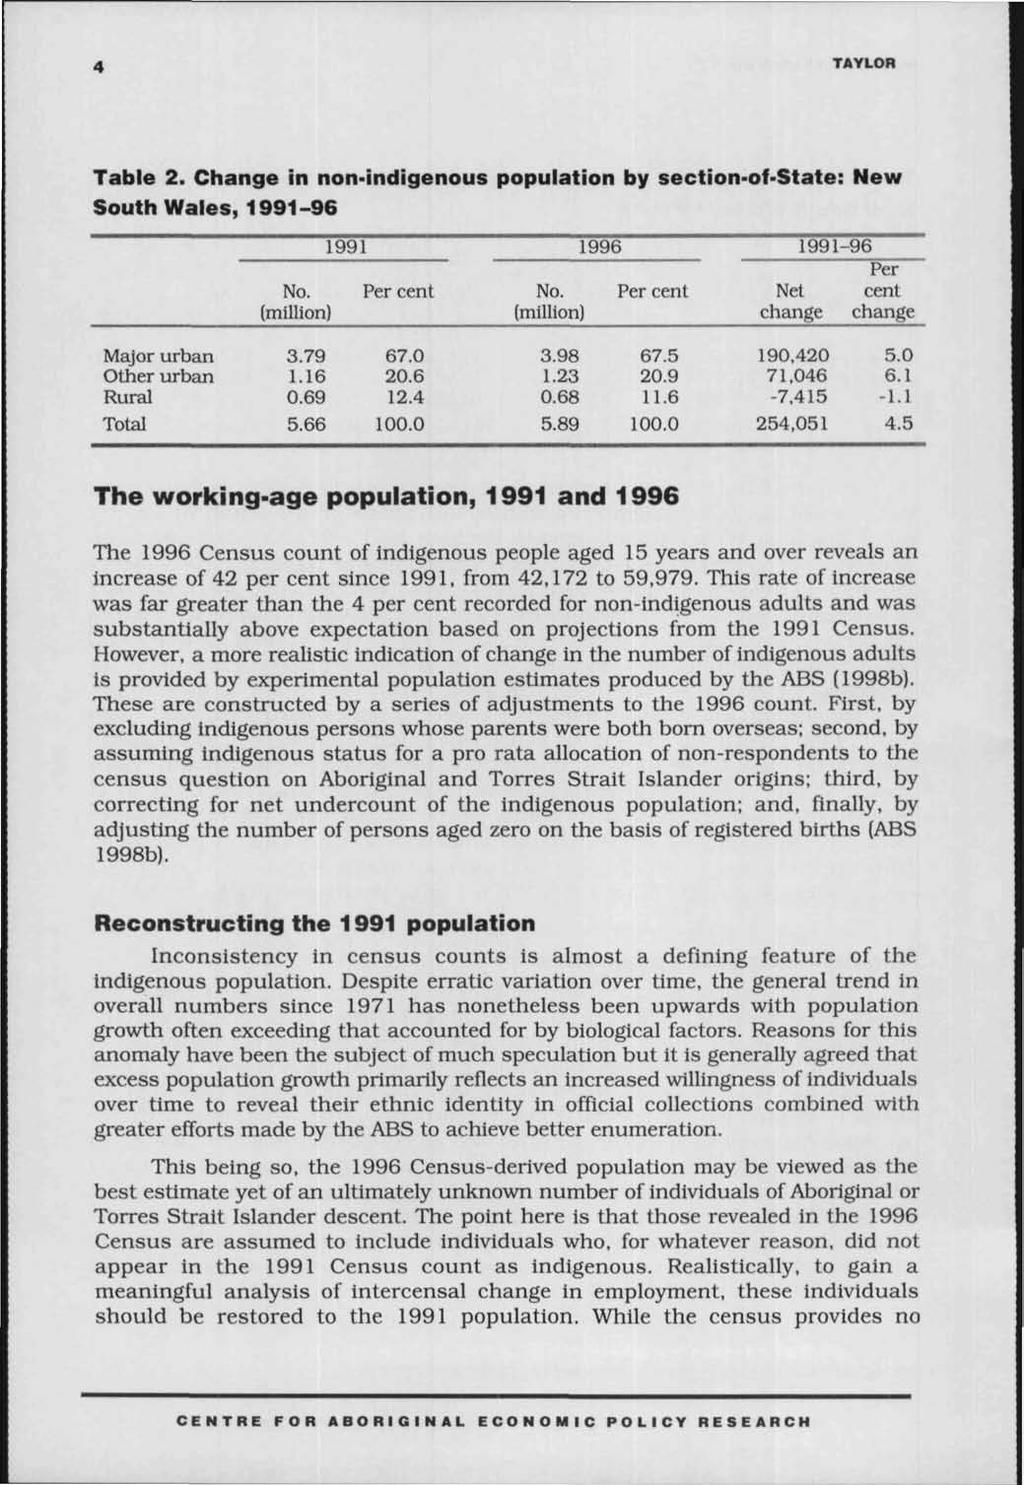 TAYLOR Table 2. Change in non-indigenous population by section-of-state: New South Wales, 1991-96 Major urban Other urban Rural Total No. (million) 3.79 1.16 0.69 5.66 1991 Per cent 67.0 20.6 12.